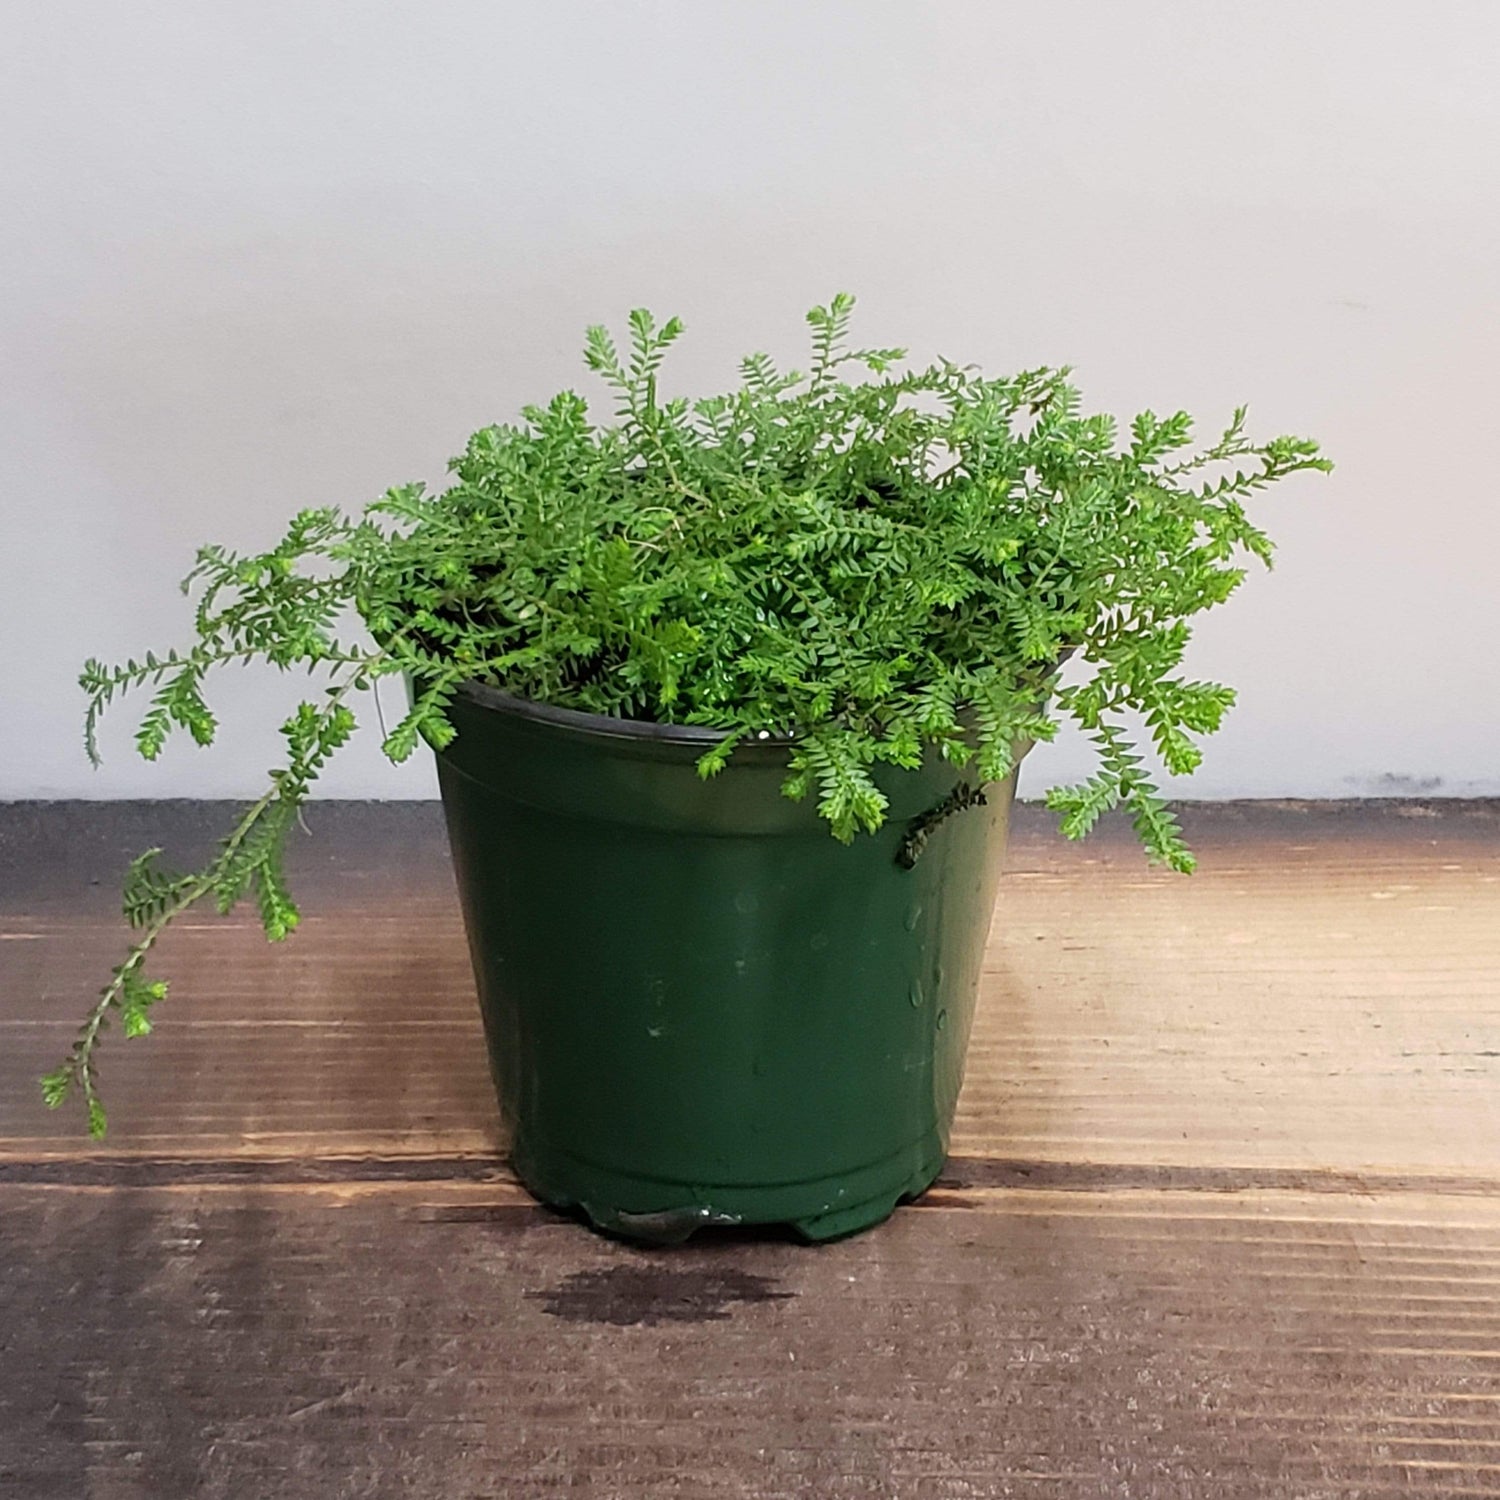 Urban Sprouts Plant 4" in nursery pot Club Moss 'Emerald Green'